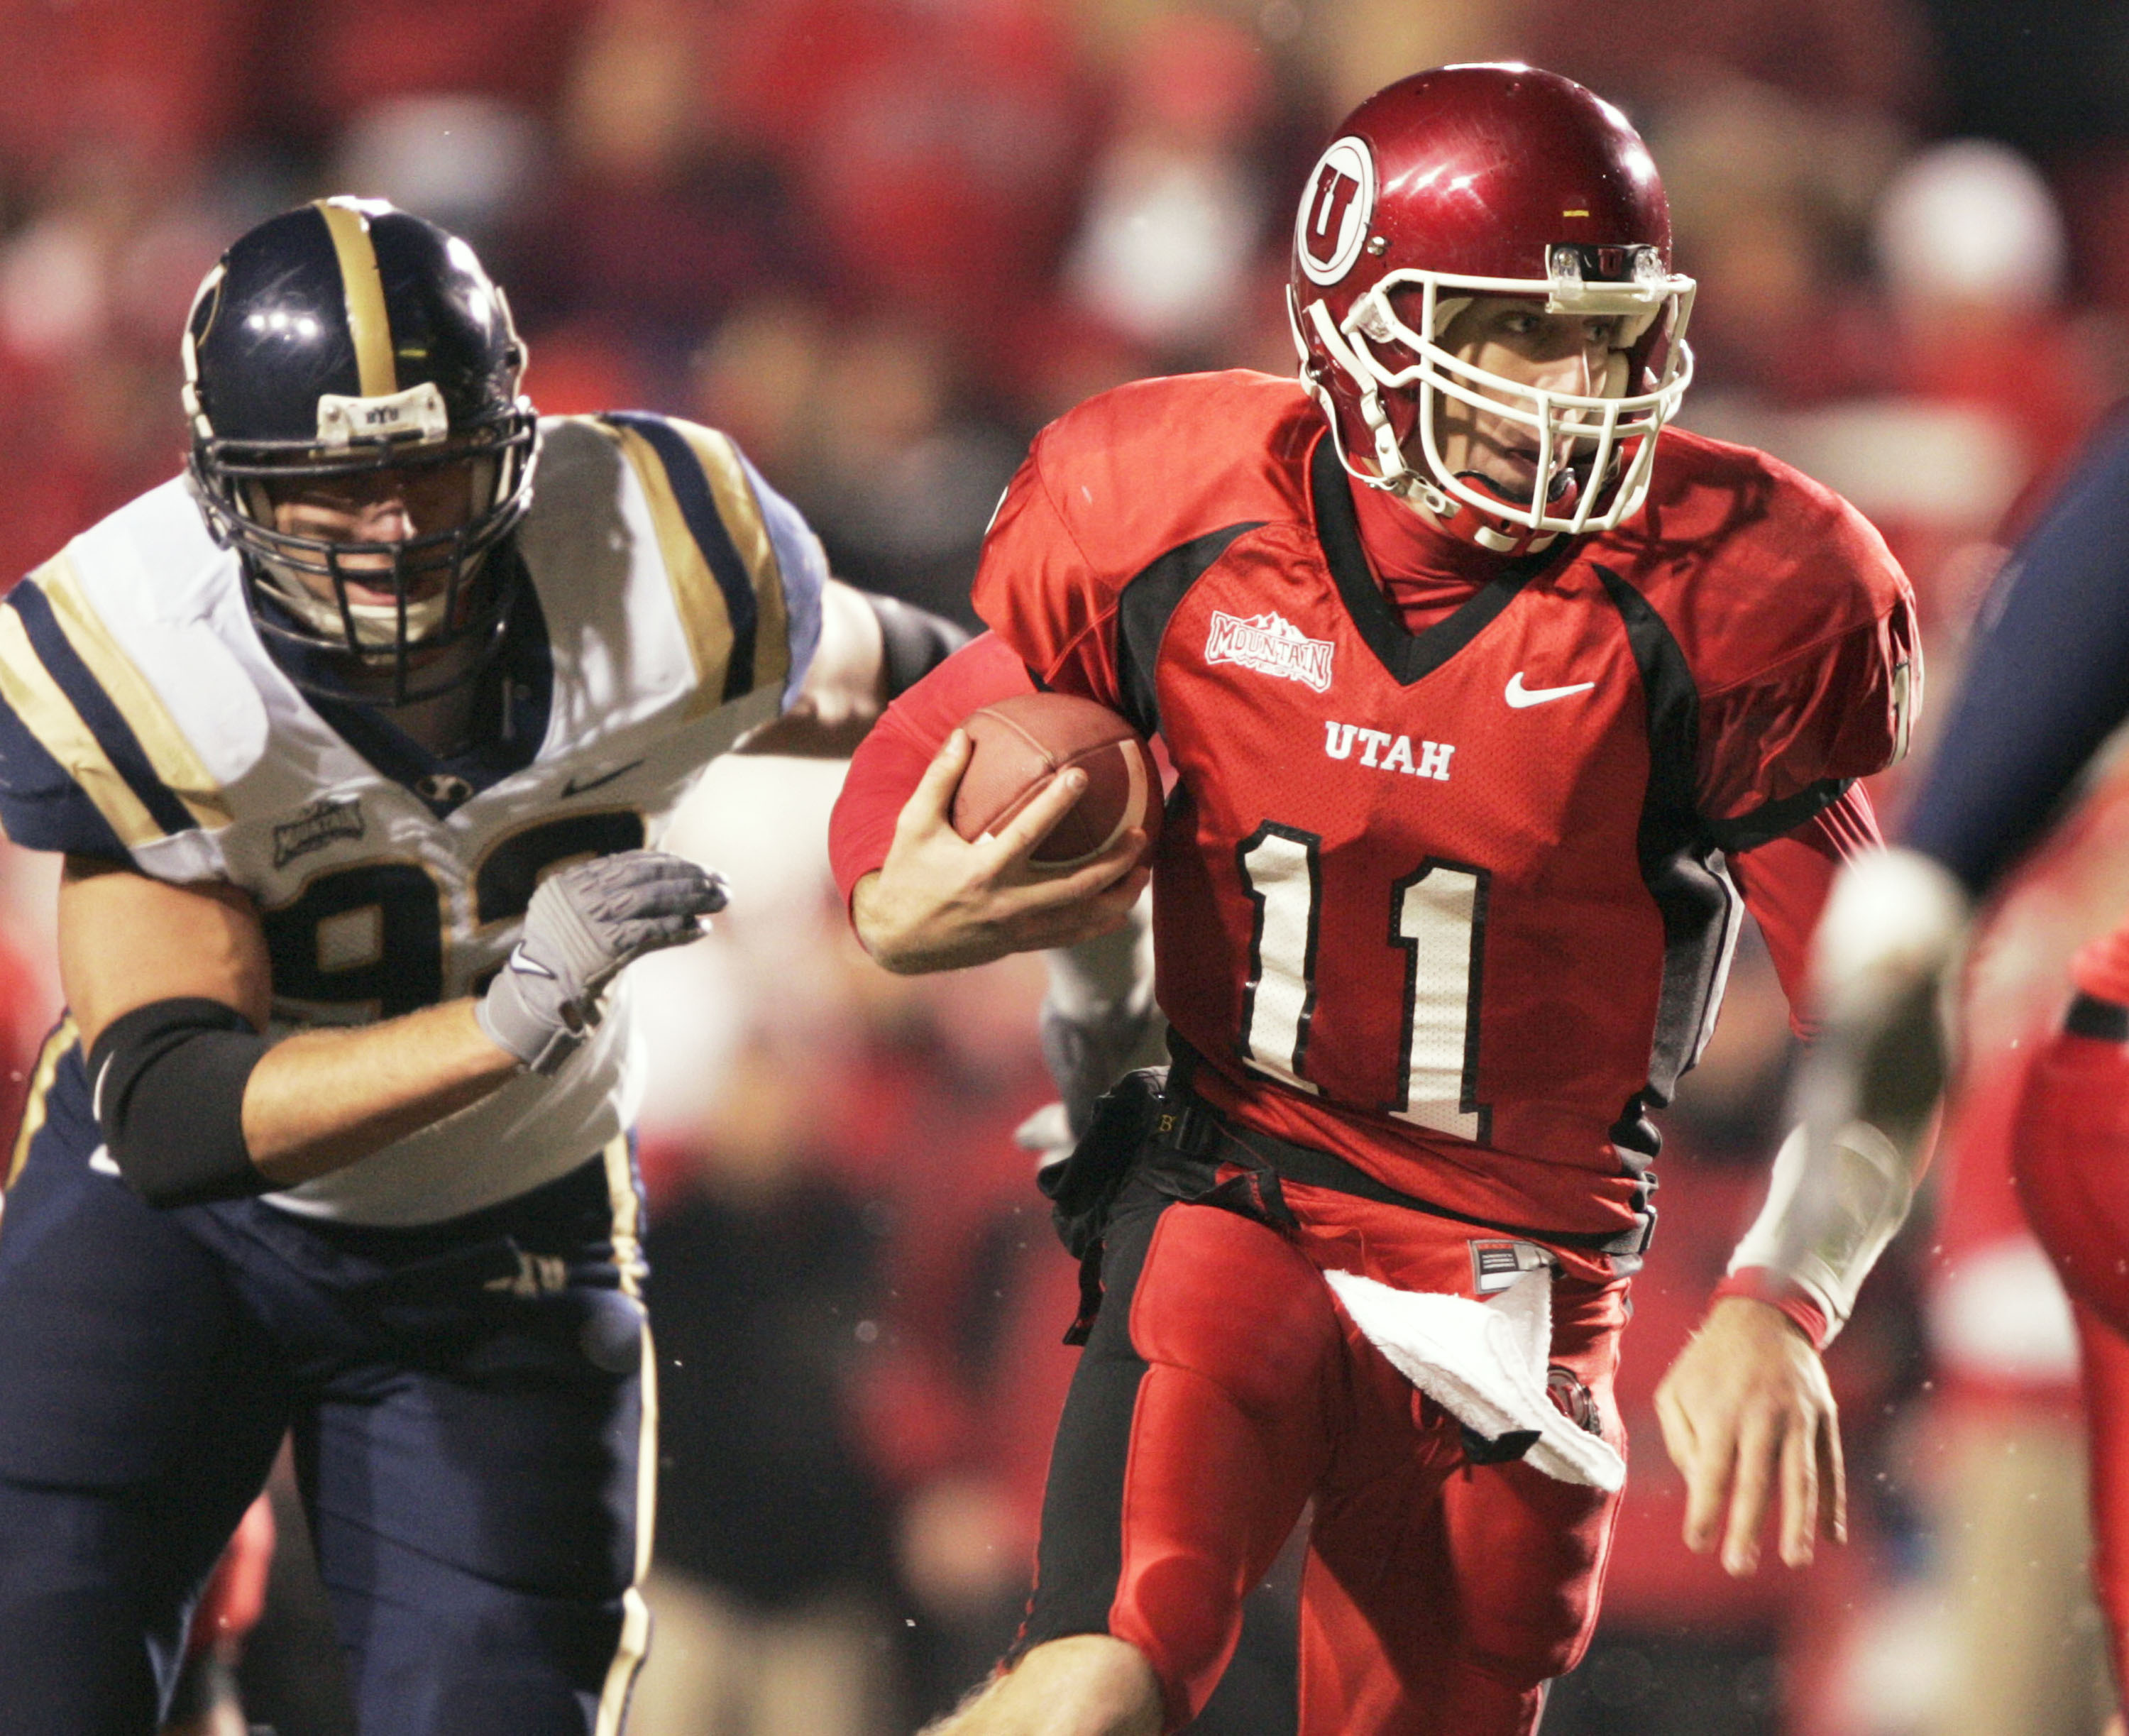 SALT LAKE CITY, UT - NOVEMBER 20: Quarterback Alex Smith #11 of the University of Utah scrambles for a first down as John Denney #92 of BYU gives chase during the second quarter November 20, 2004 at Rice Eccles Stadium in Salt Lake City, Utah. (Photo by G